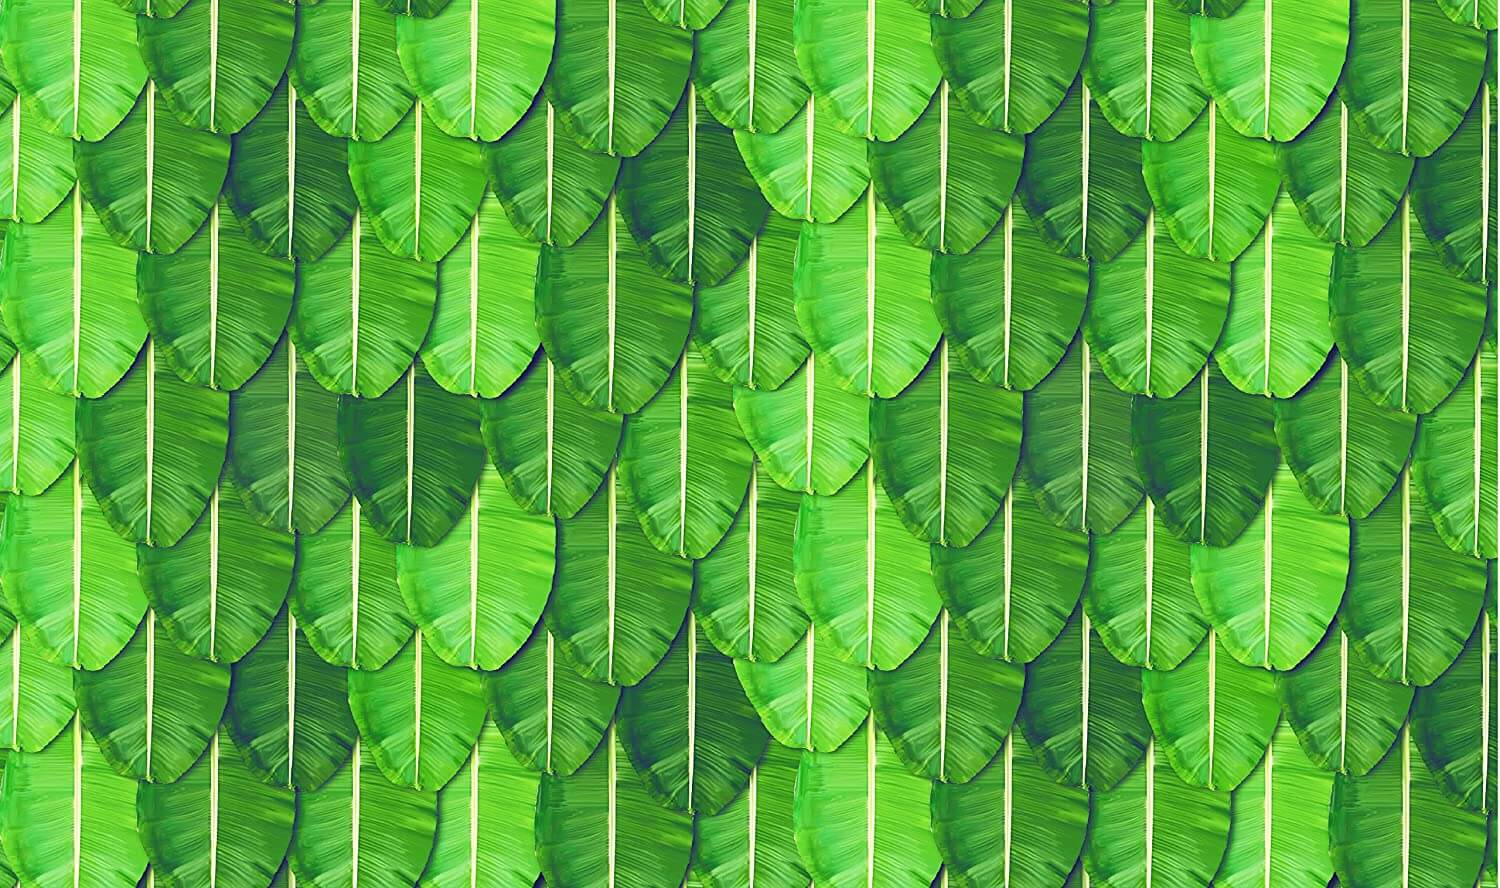 5 x 8 Ft - Banana Leaf Design - Traditional Backdrop Curtain for Pooja / Festival (Taiwan Polyester Fabric) (Washable) Mangal Fashions | Indian Home Decor and Craft